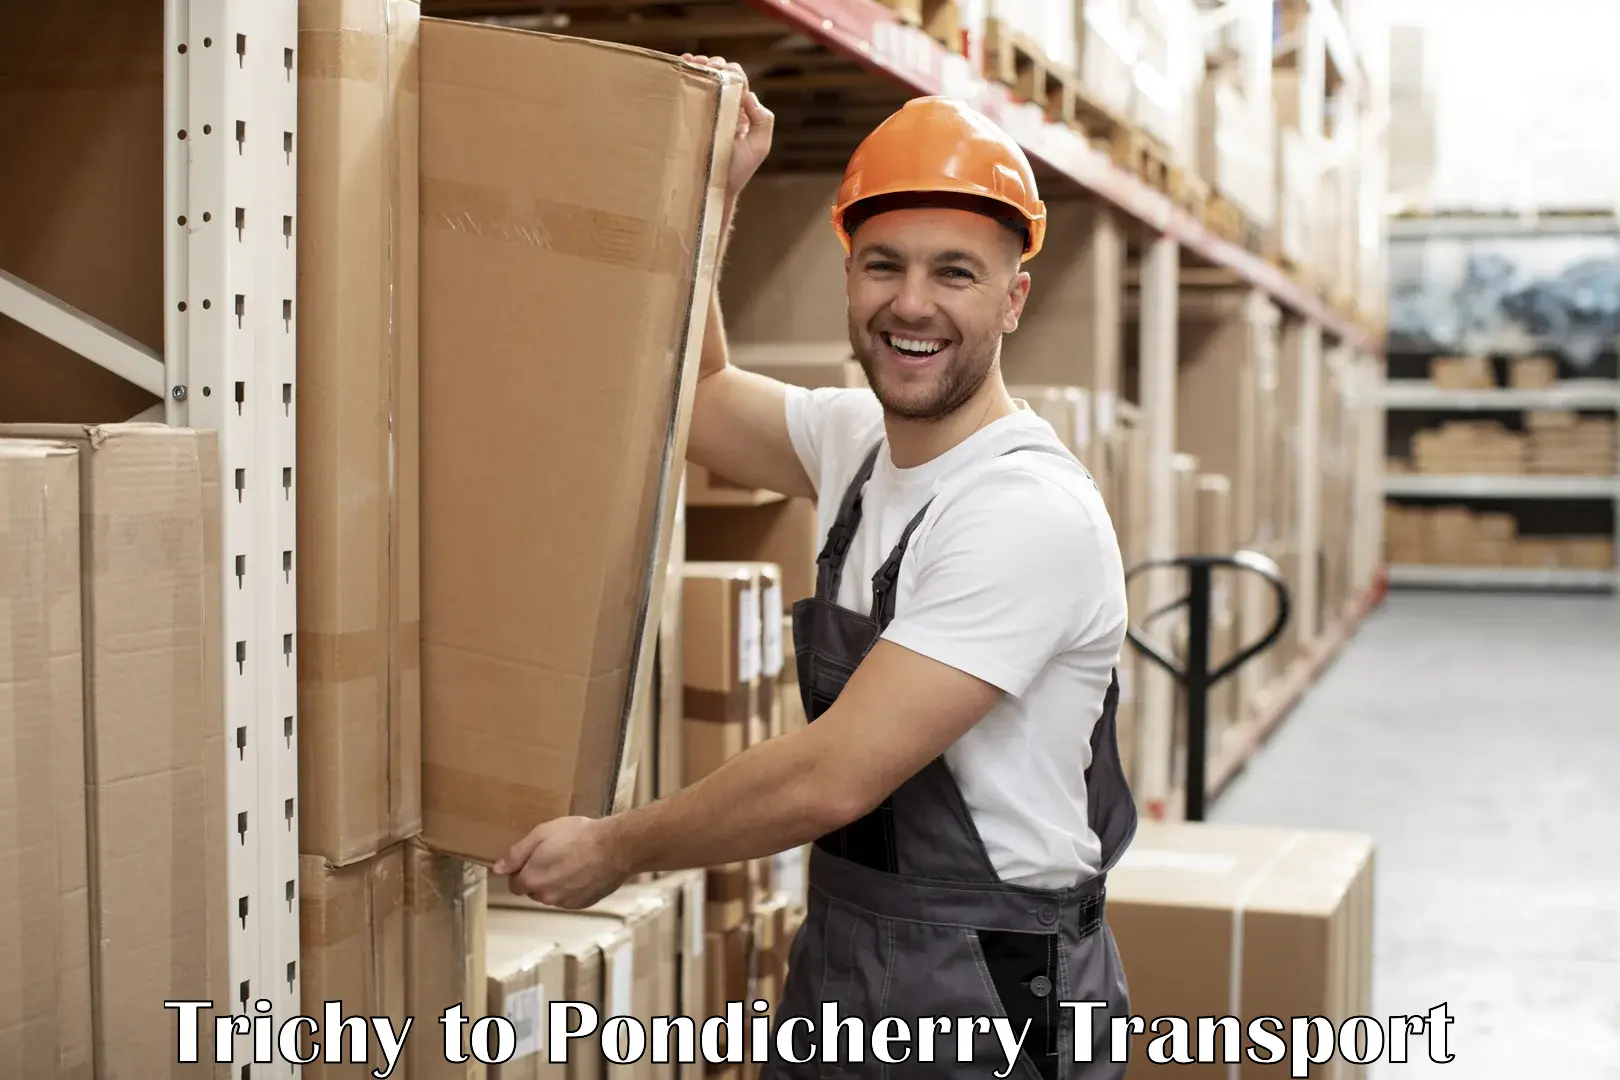 Container transport service Trichy to Pondicherry